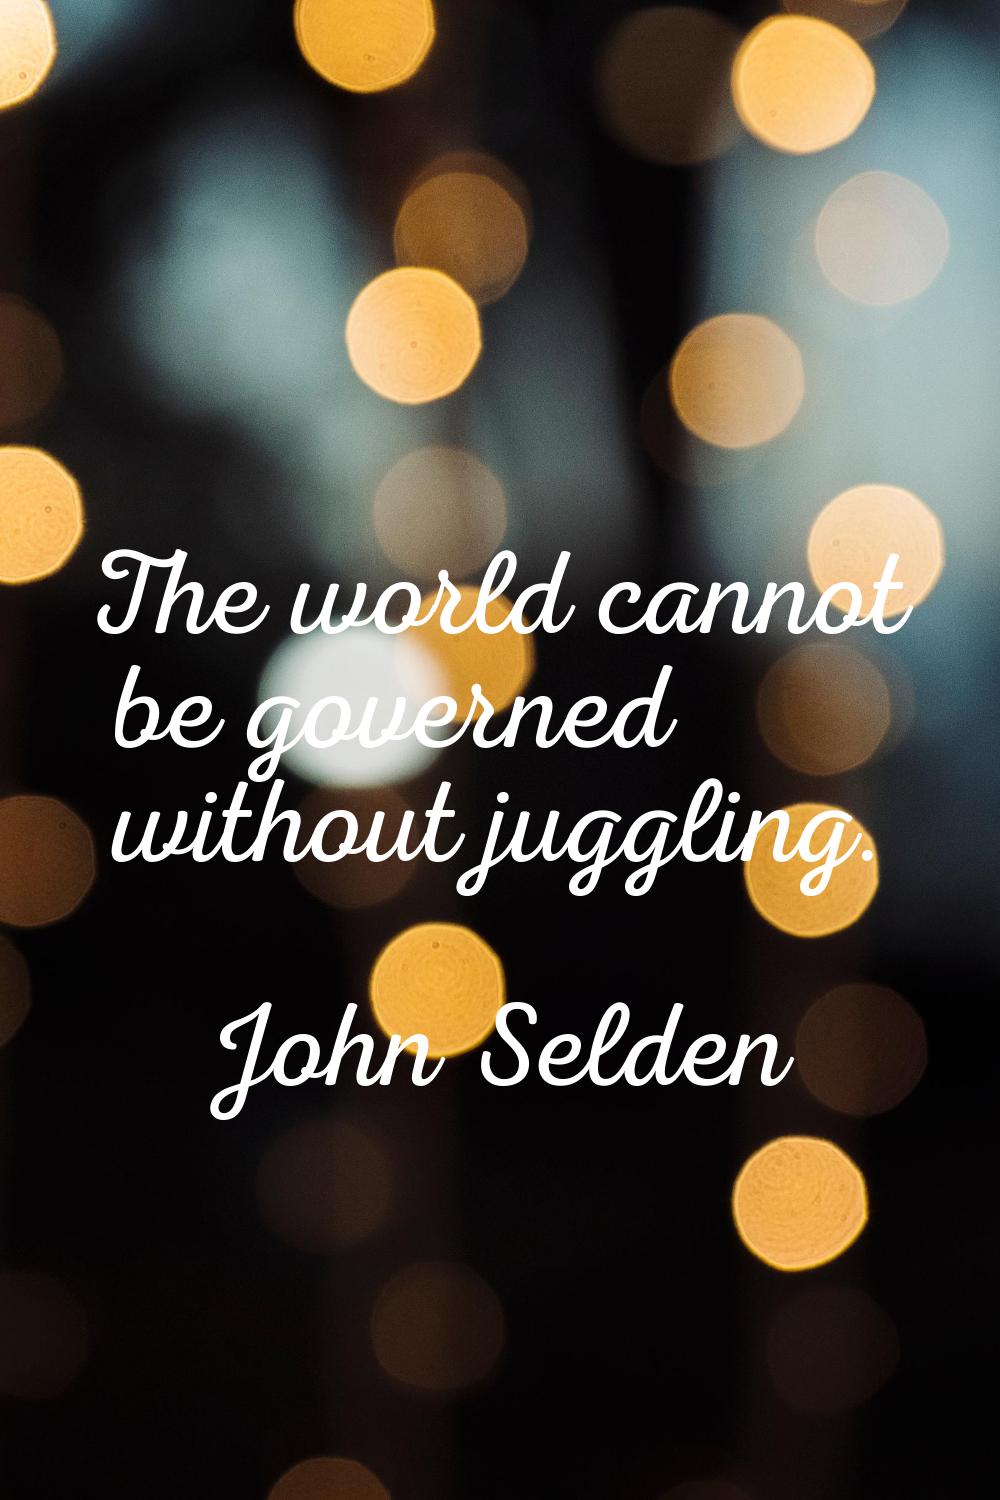 The world cannot be governed without juggling.